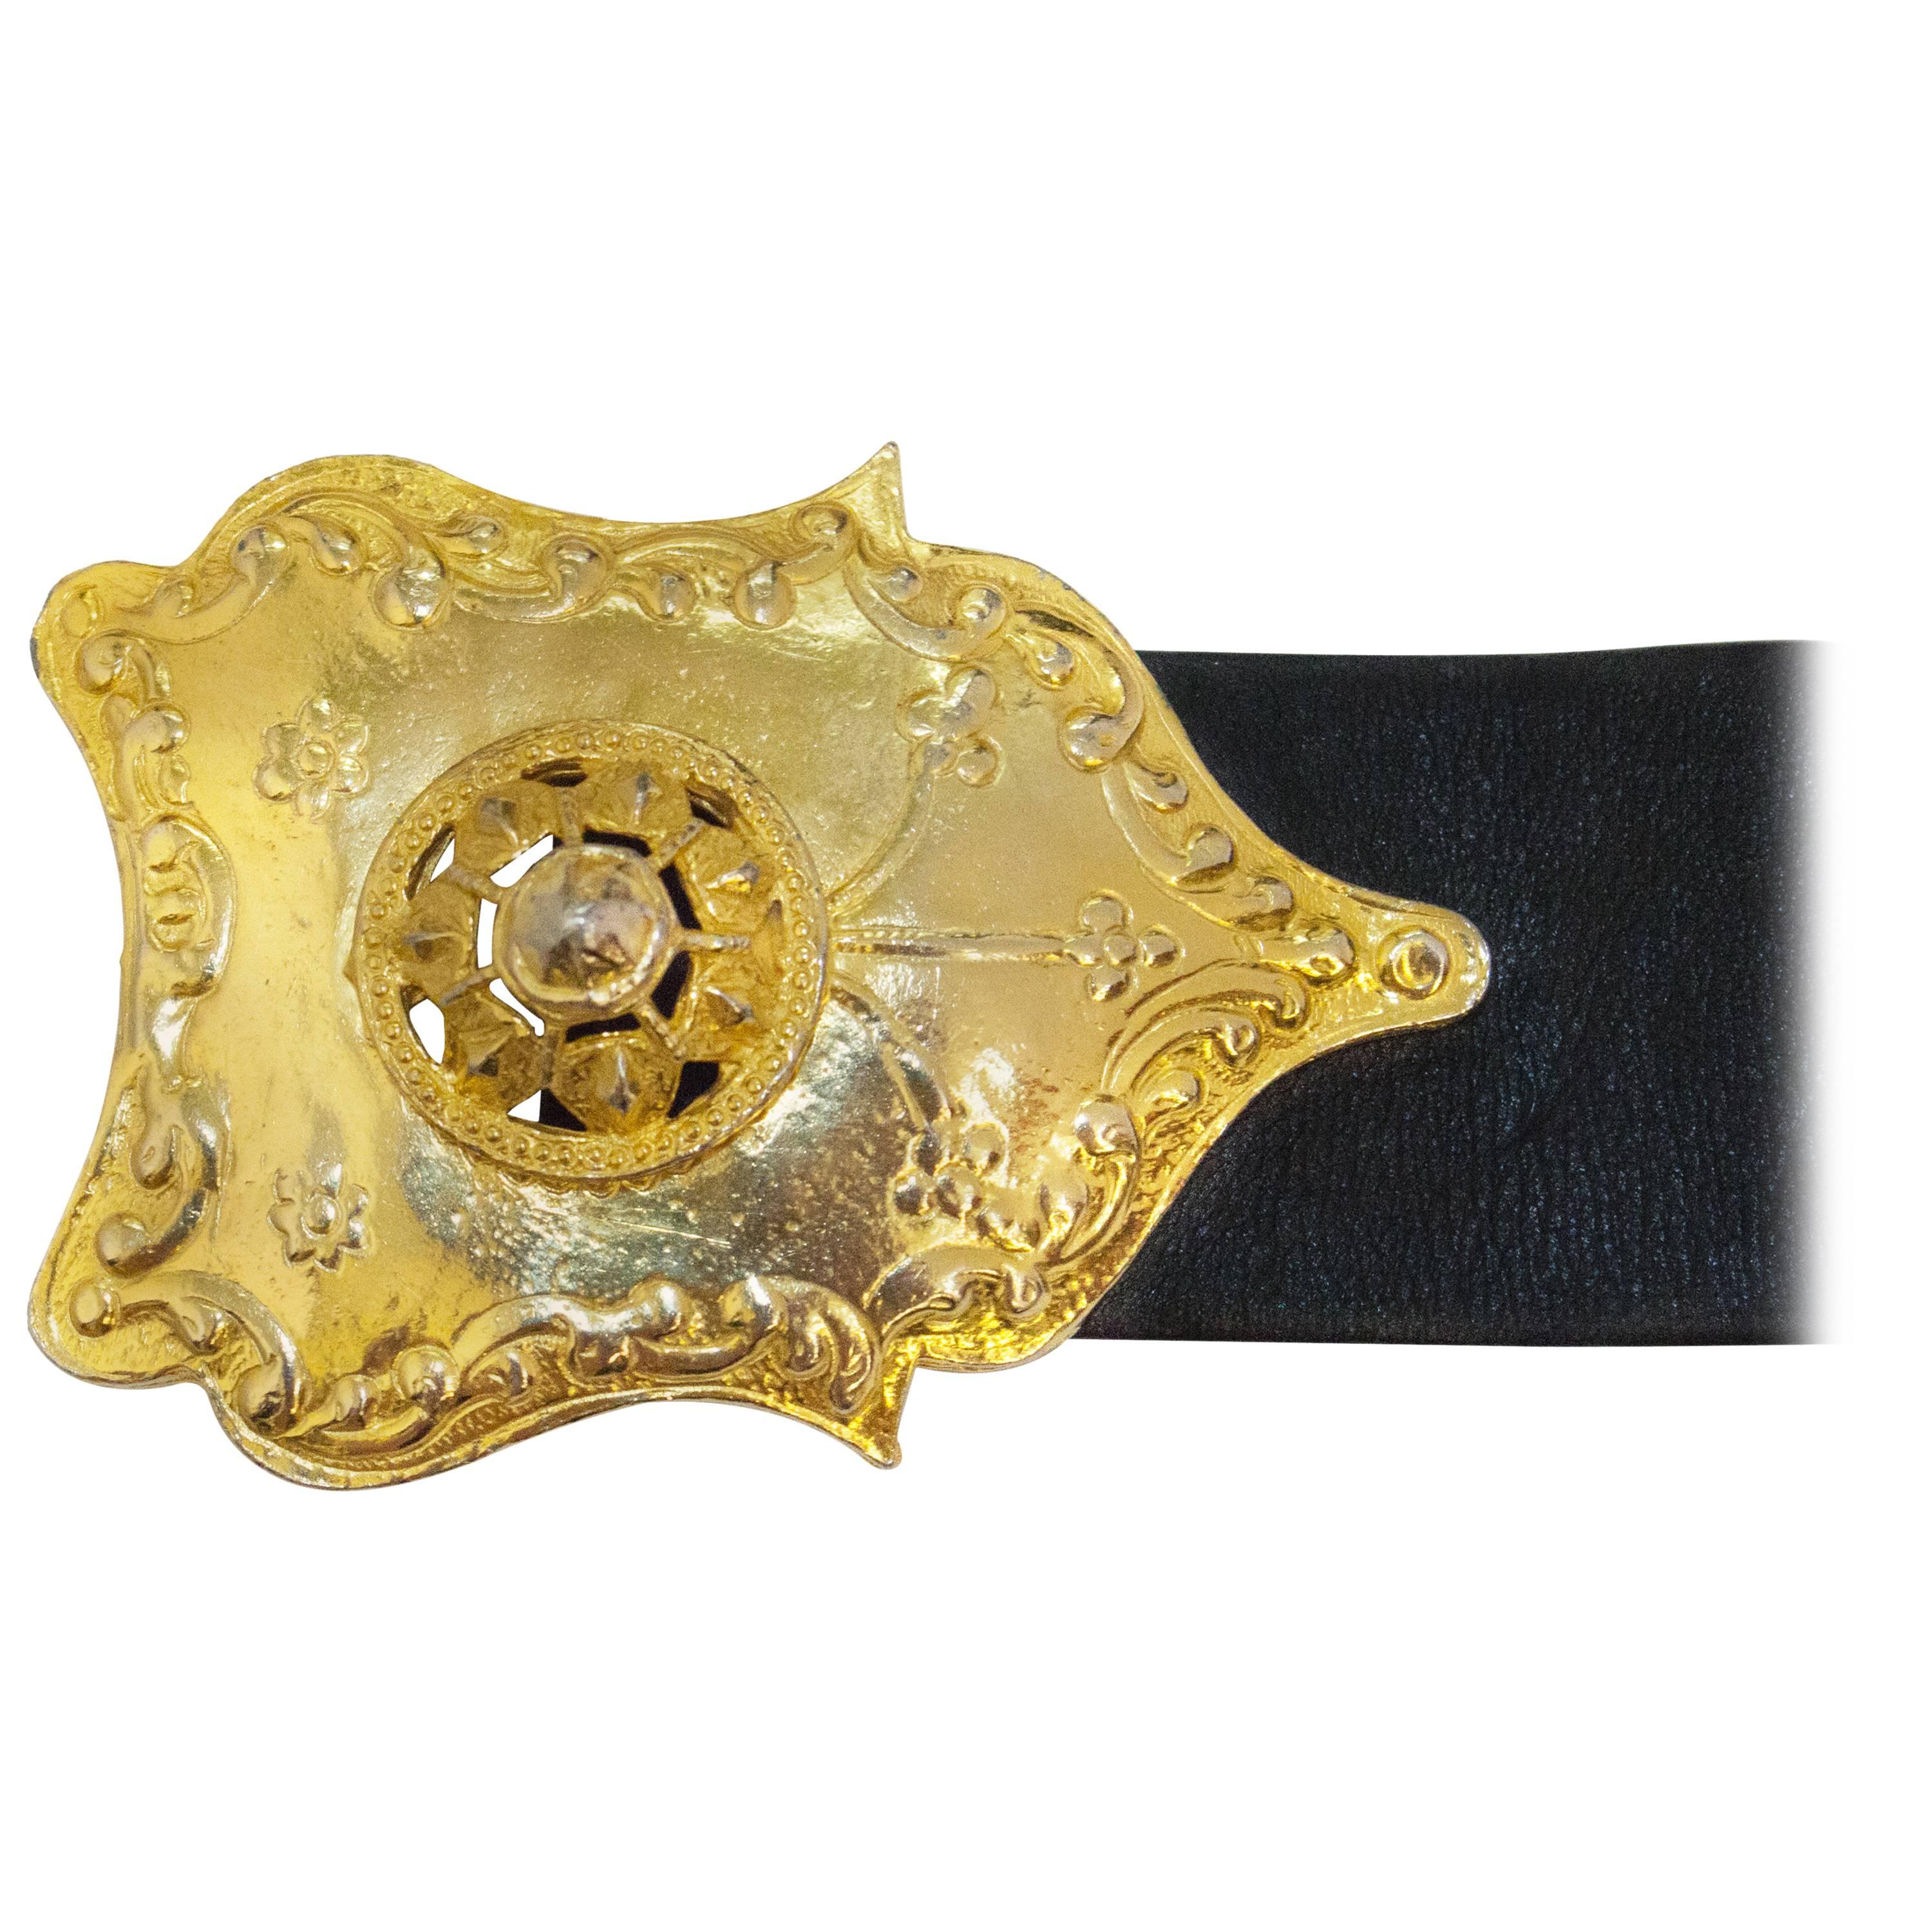 70s Alexis Kirk Black Leather Belt with Exotic Gold Buckle